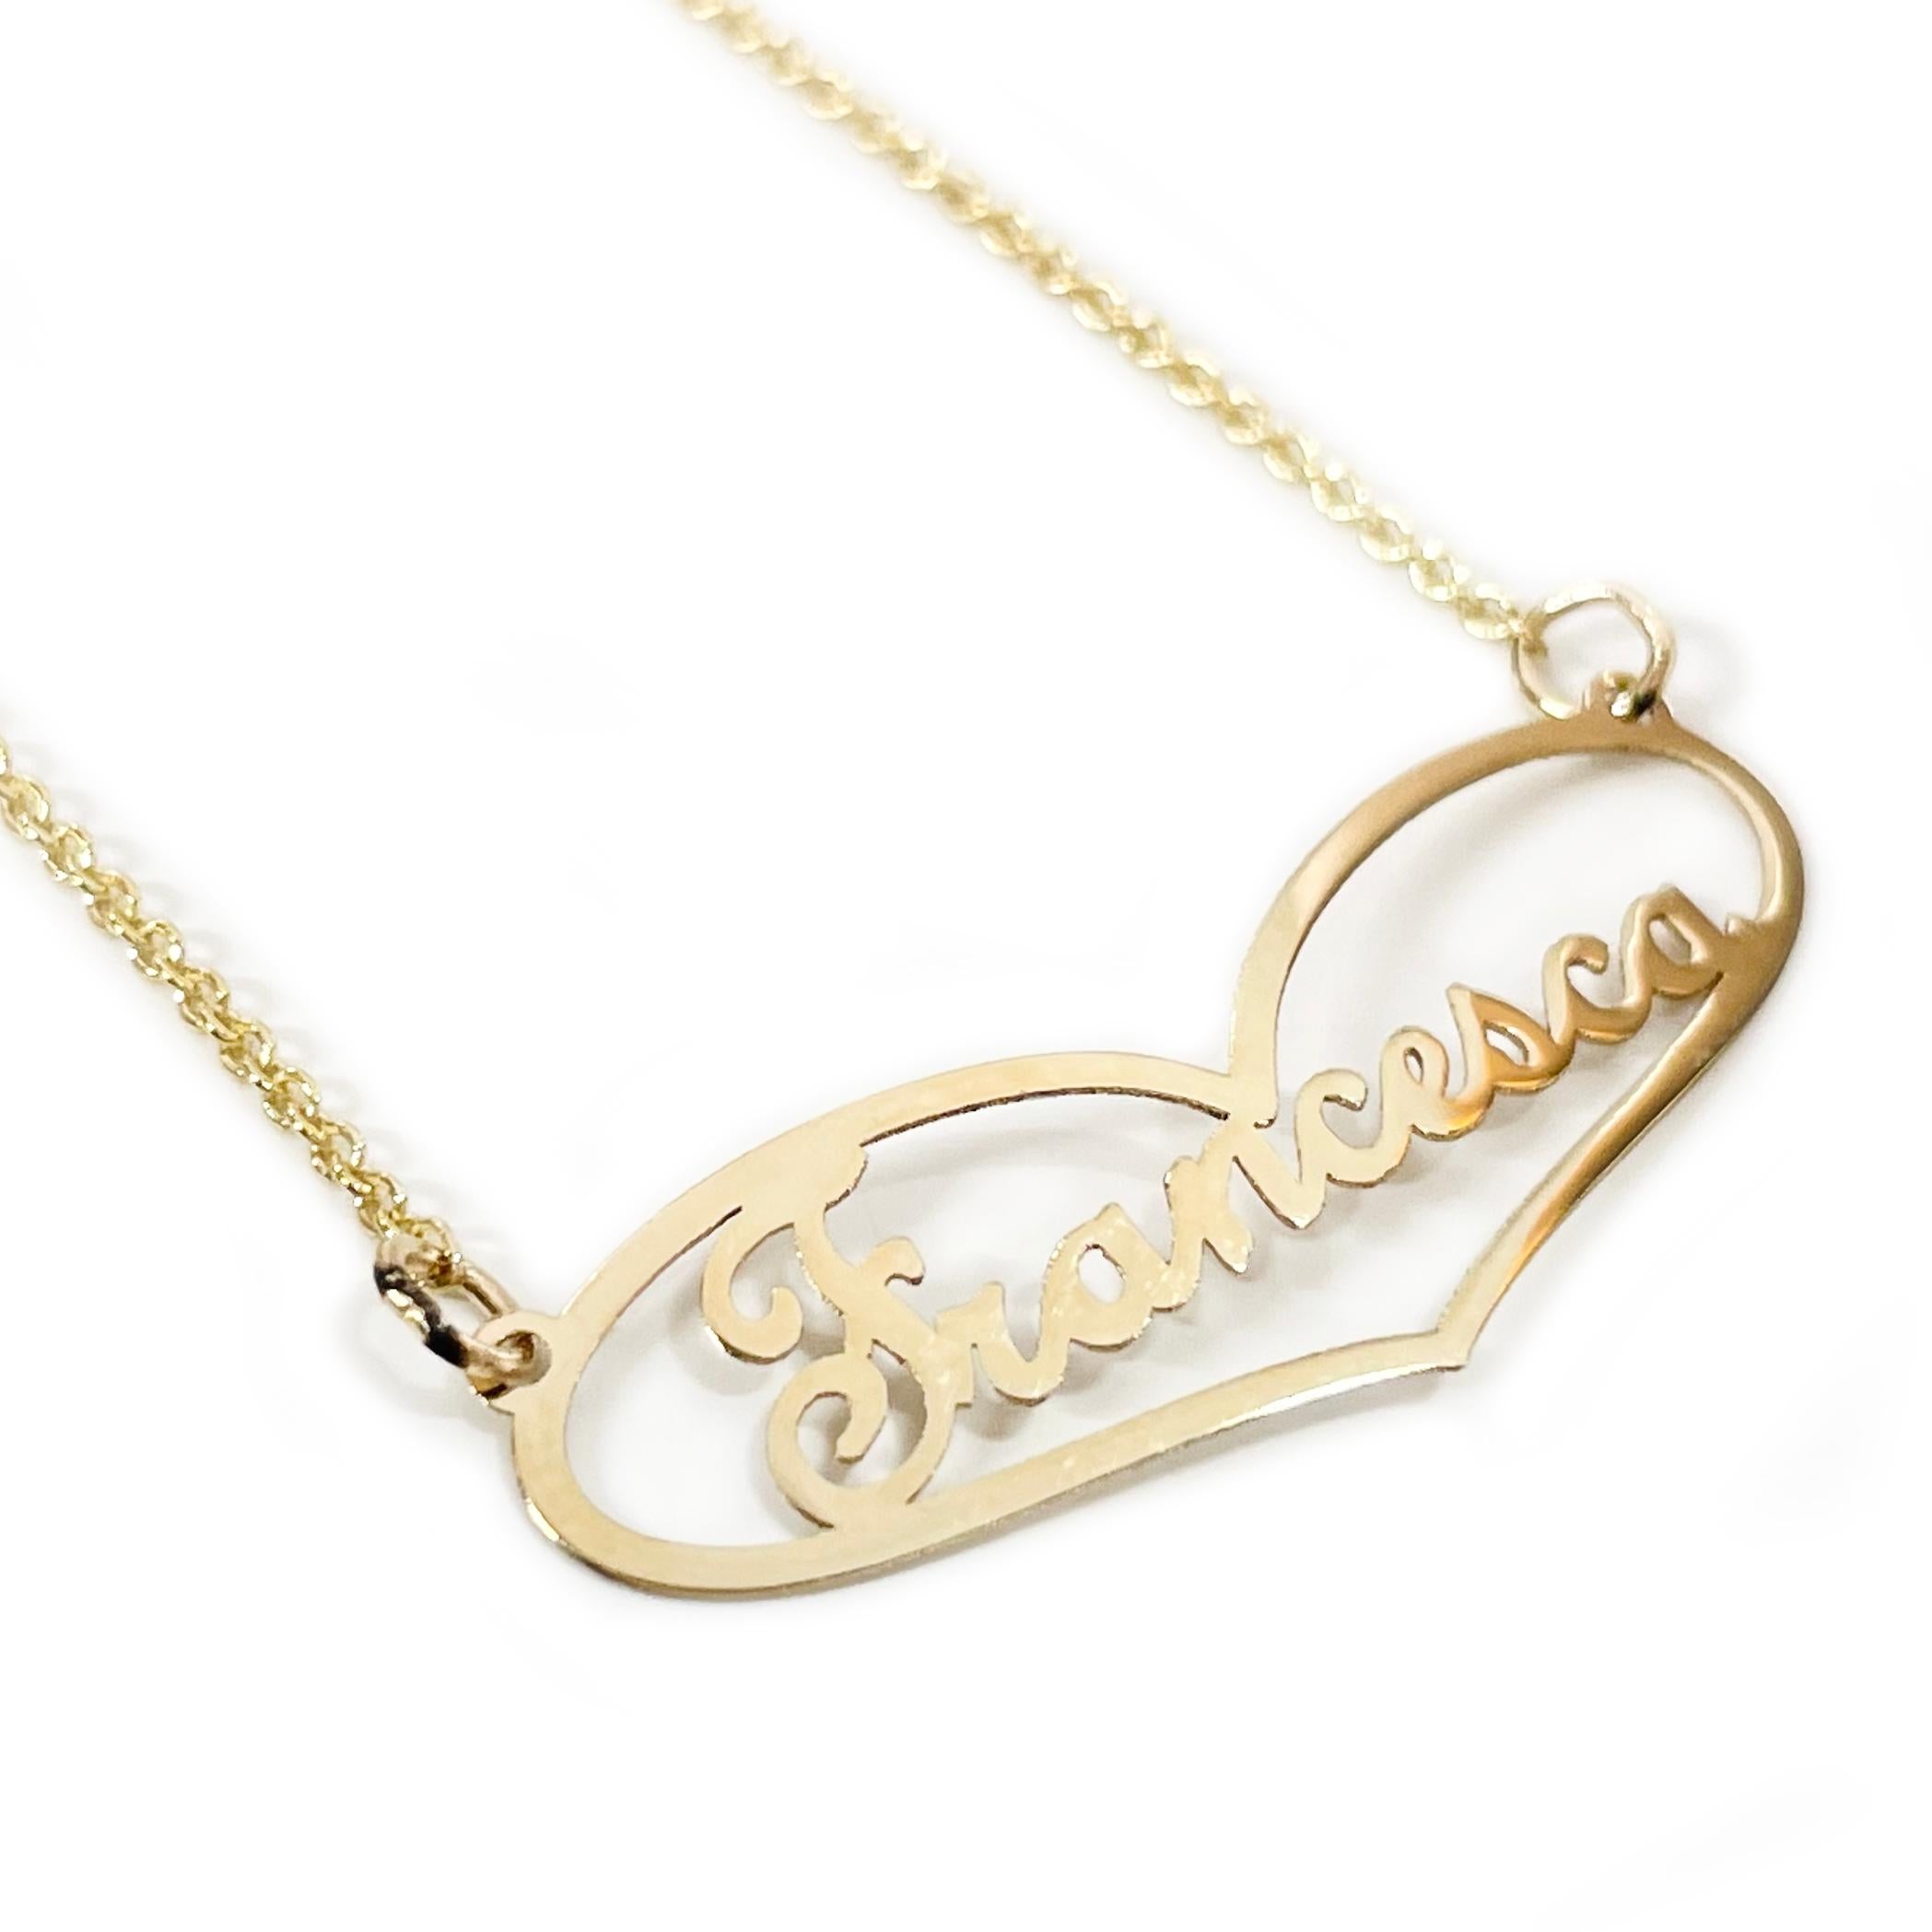 10 Karat Yellow Gold Francesca Name Pendant Necklace. The necklace features an elongated heart shape pendant with the name Francesca inside the heart in a cursive font. The chain is 18